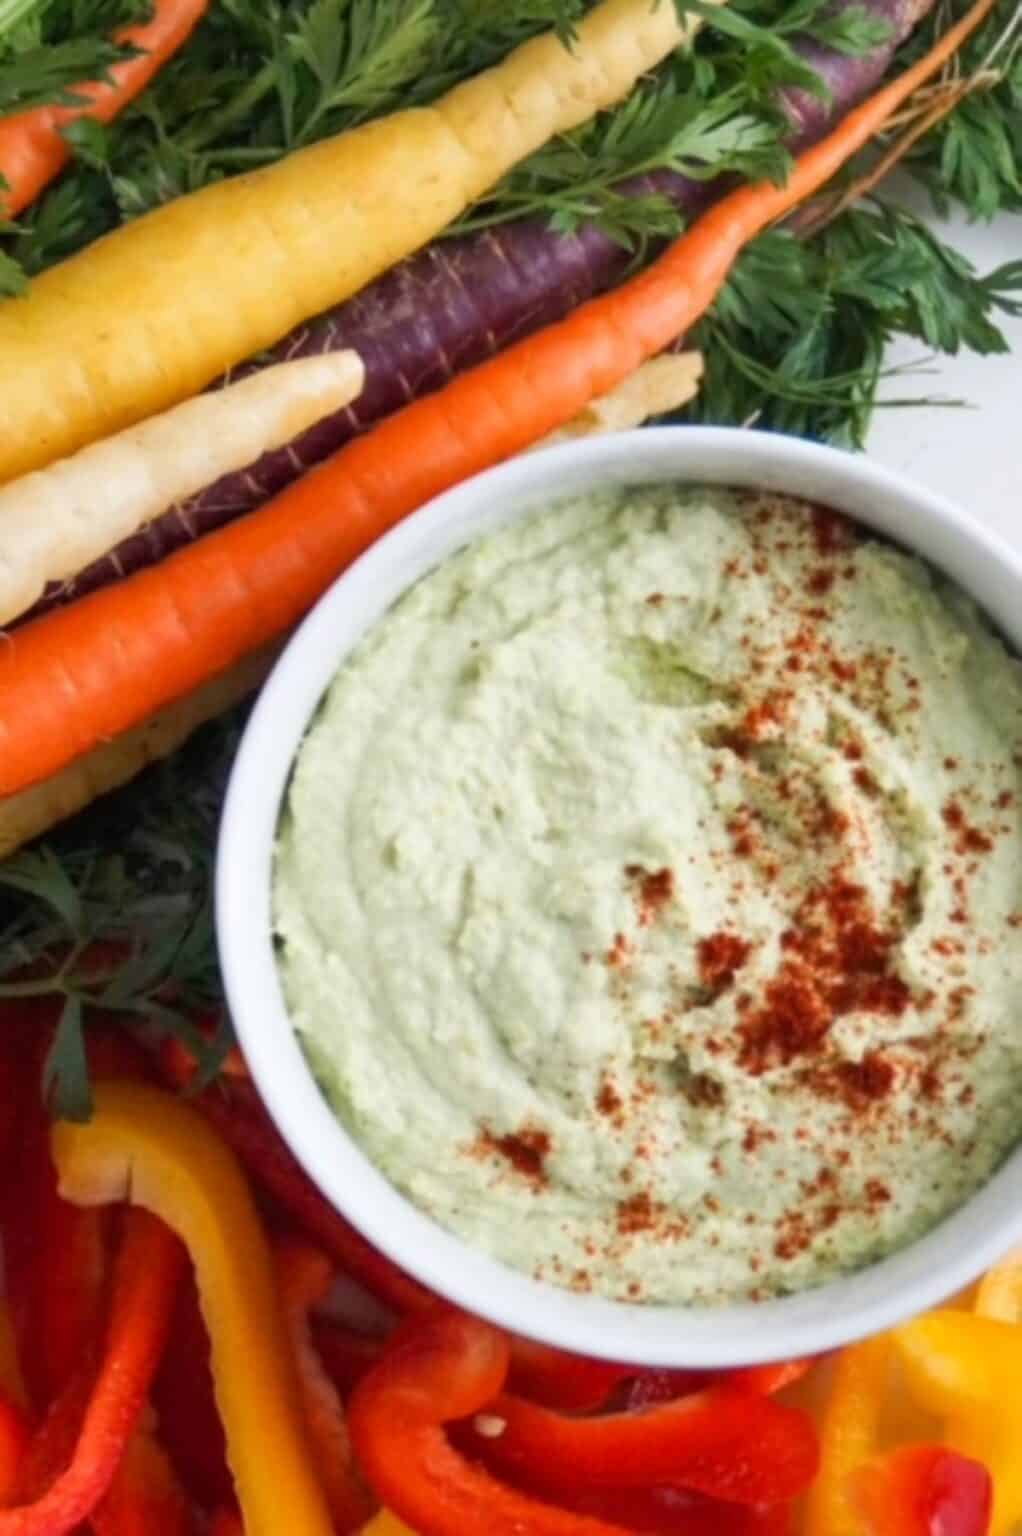 Edamame Hummus in a white bowl garnished with red paprika against the green creamy dip. 